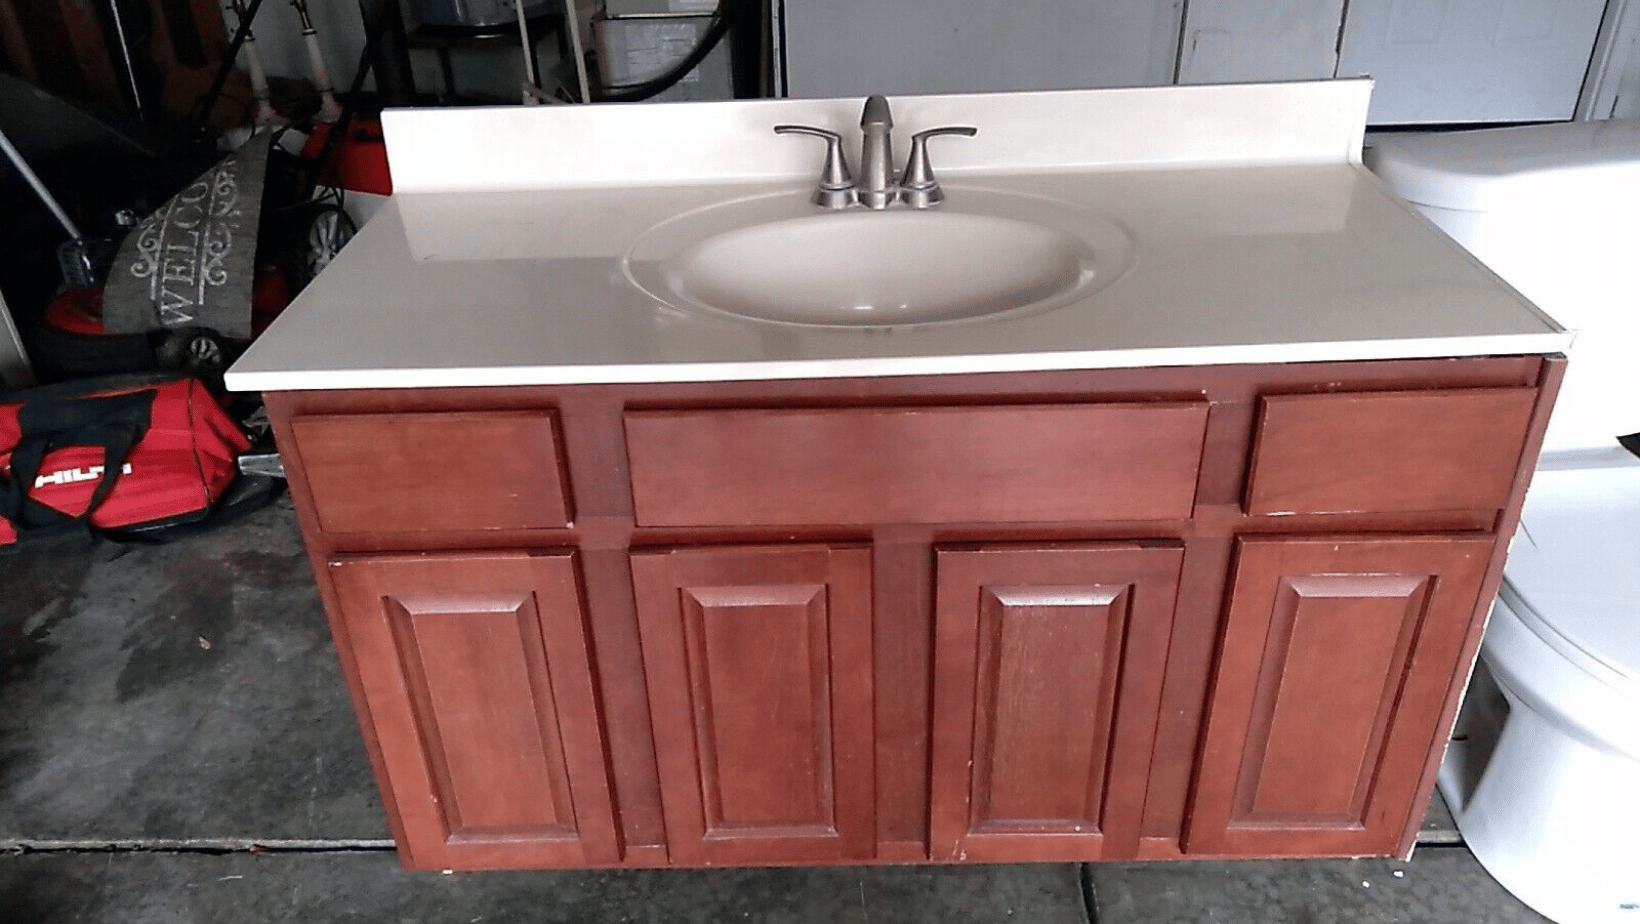 Minor vanity chips, cracks and stains on a moderately good condition used bathroom vanity.